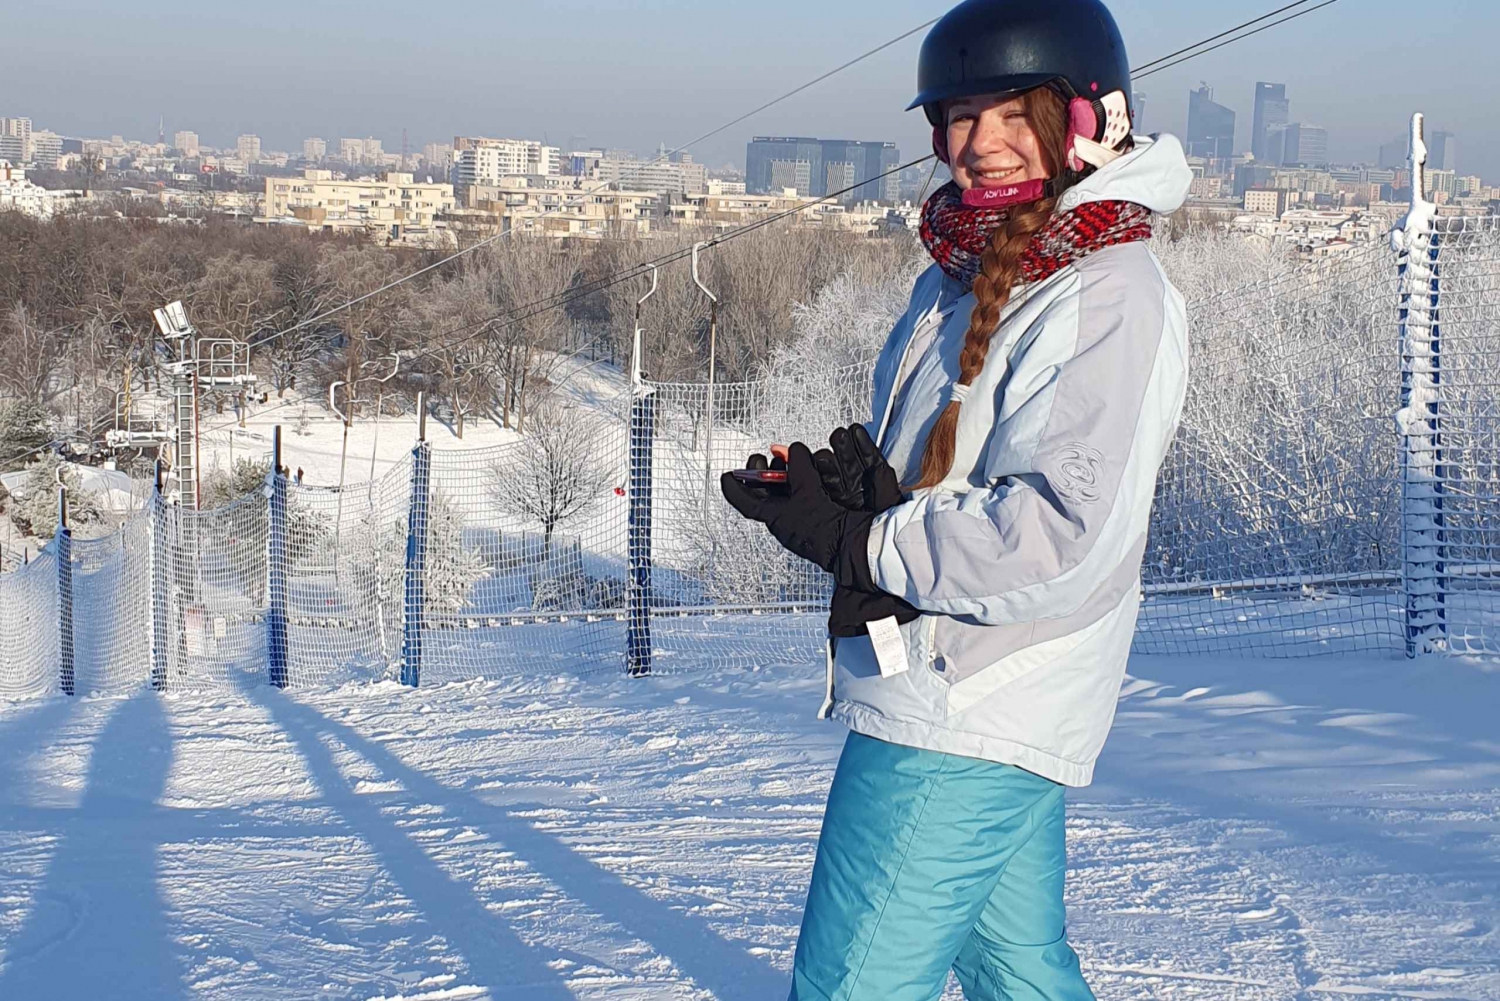 Warsaw: ski lesson near city center on an artificial slope